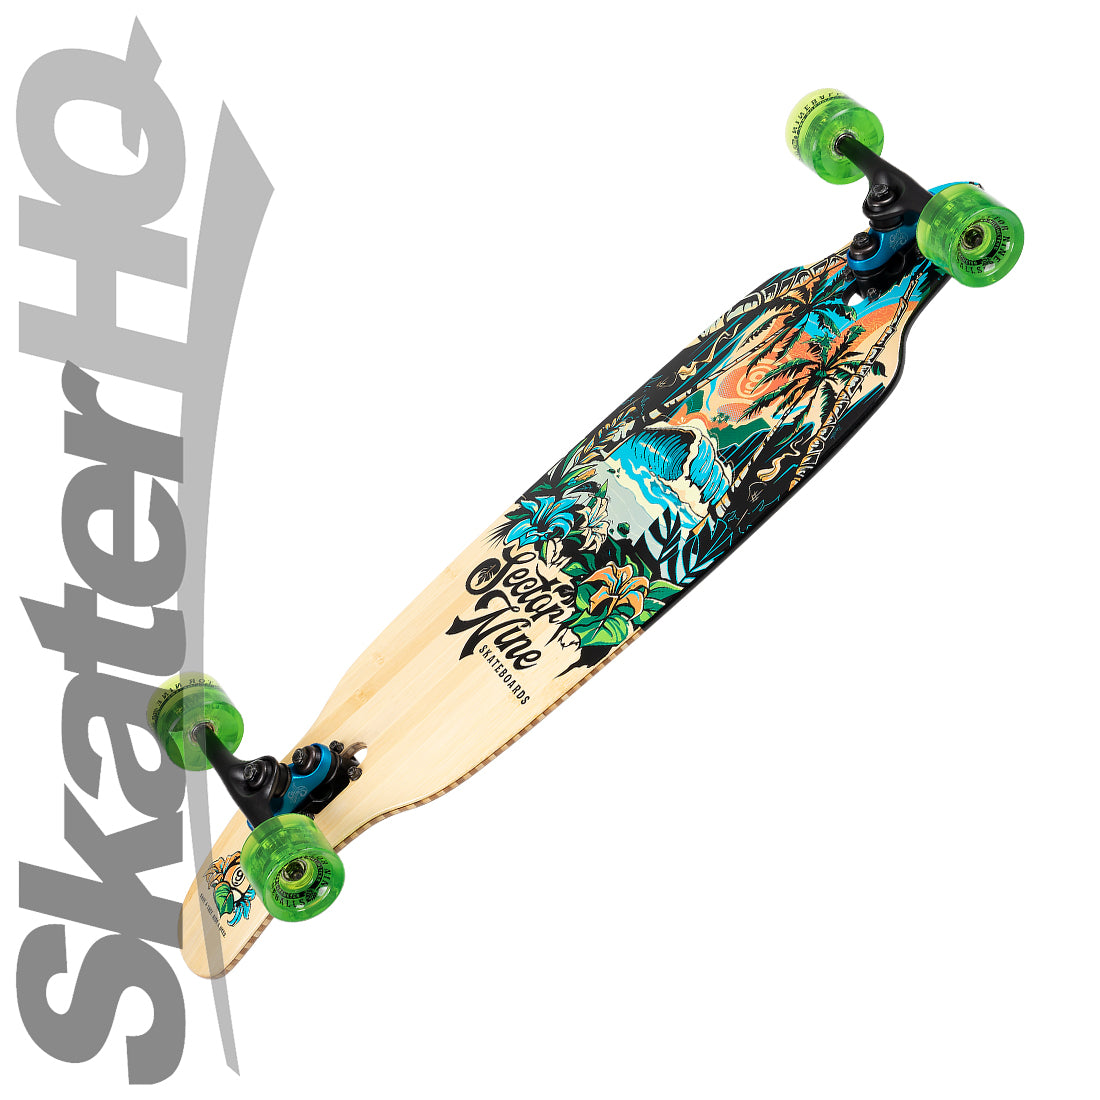 Sector 9 Striker Aina 36.5 Complete - Bamboo/Green Skateboard Completes Longboards